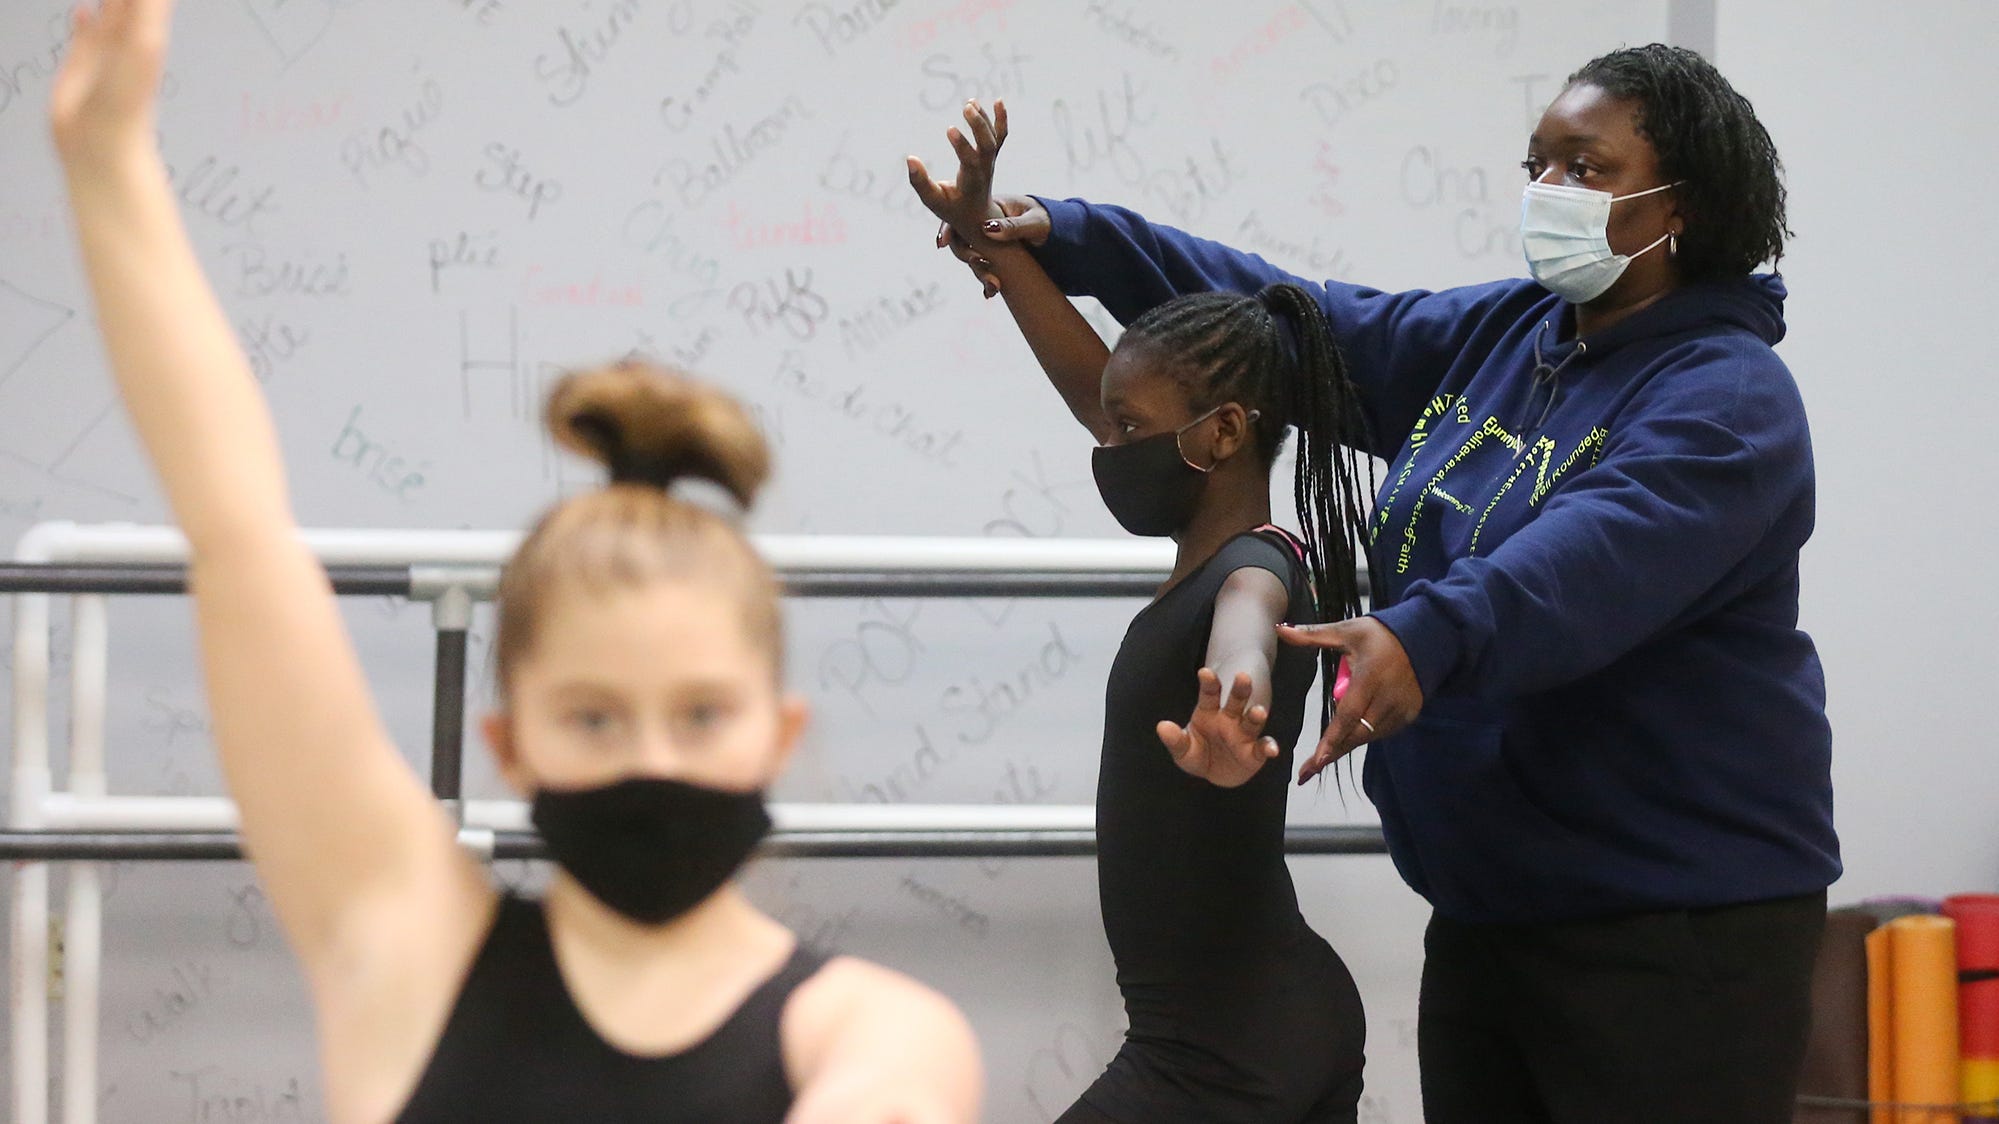 Sheena Mason of Sheena's Platinum Dance Movements works with Chyan Rogers, 11, on placement during a class at her studio in Akron.